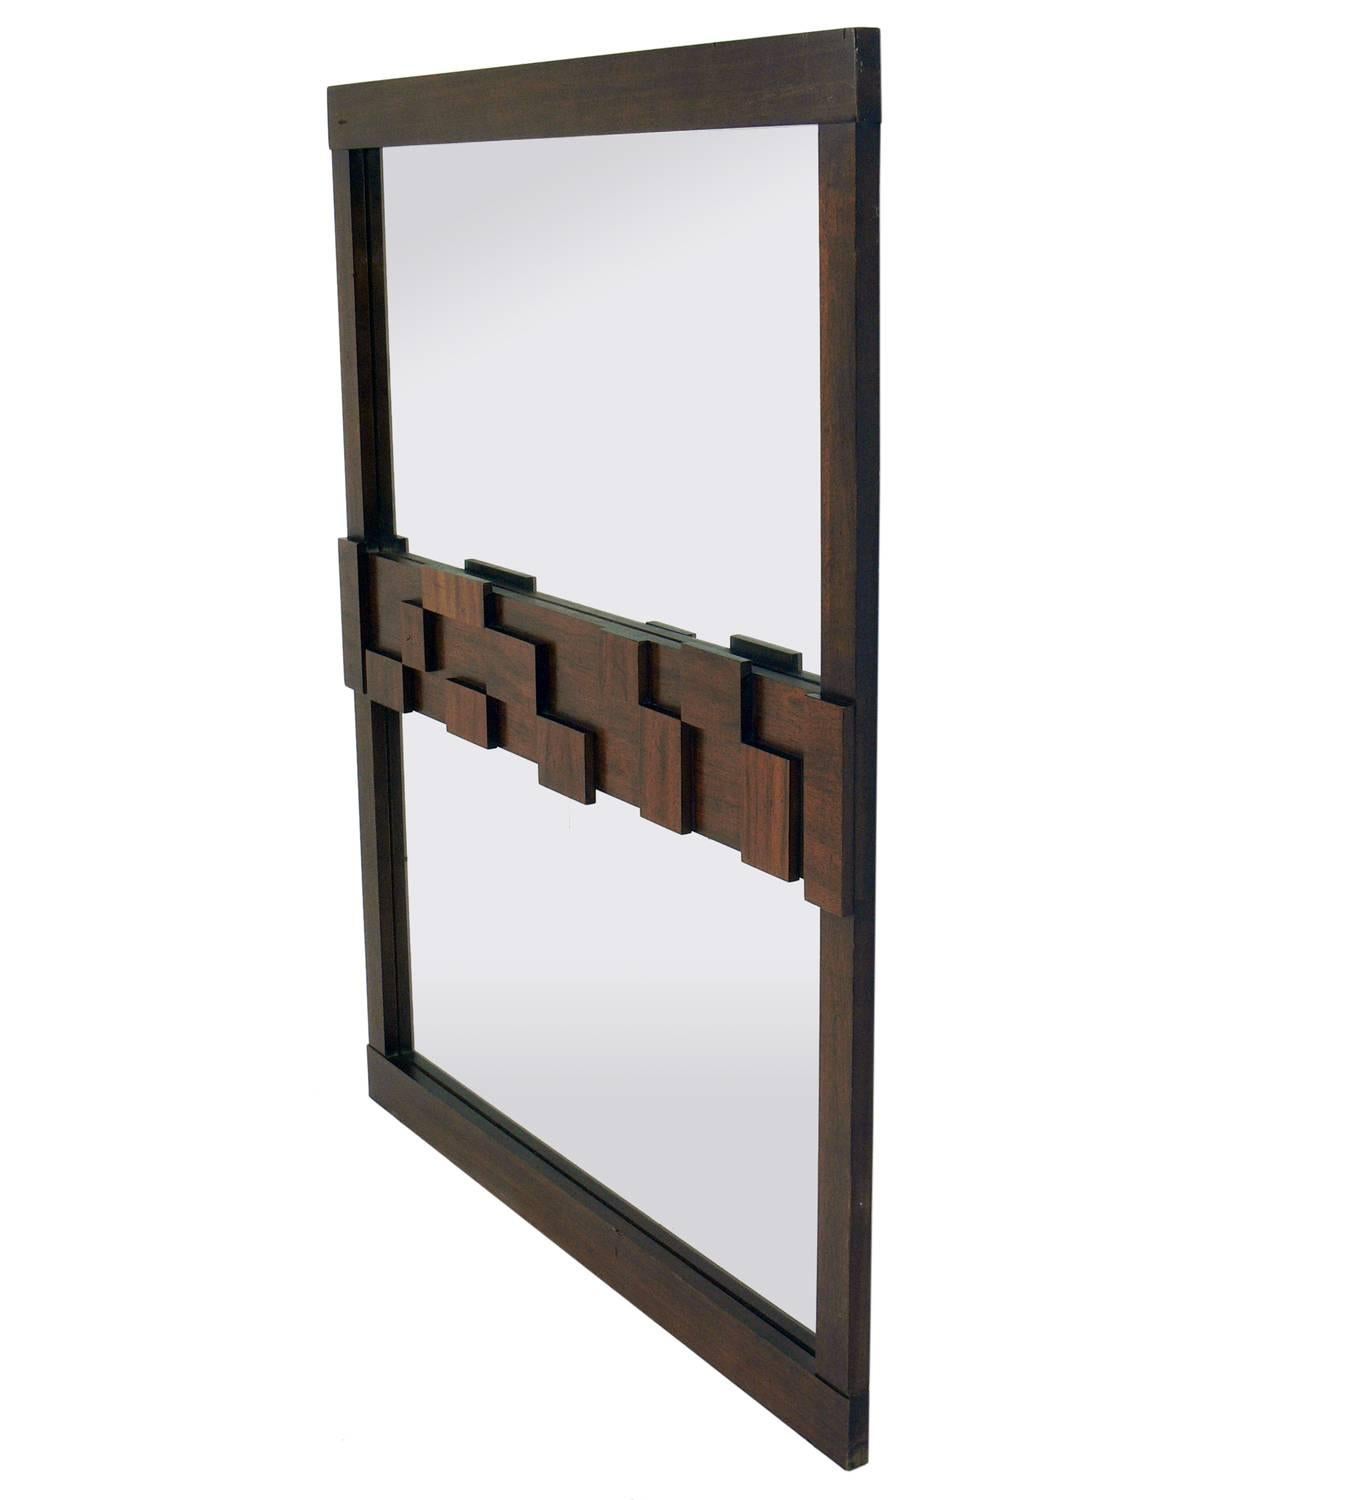 Midcentury Brutalist mirror by Lane, American, circa 1960s. This piece retains it's original medium brown finish. If you prefer, we can refinish it in the color of your choice, including solid lacquer colors like white, for an additional $250.